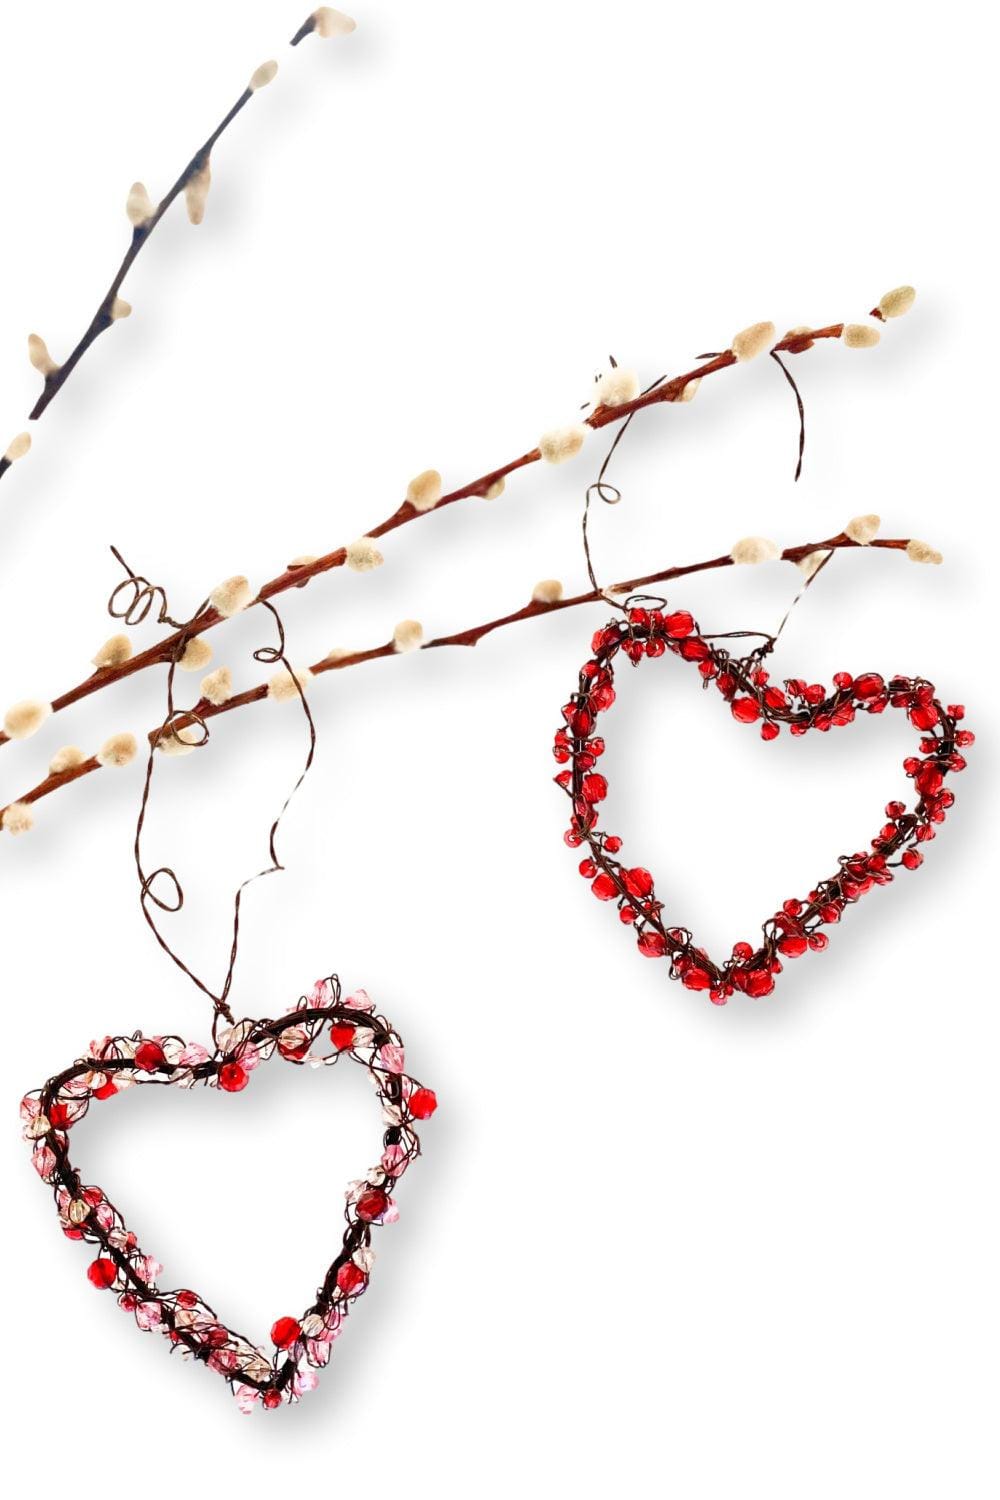 Jeweled Wired Heart Ornaments